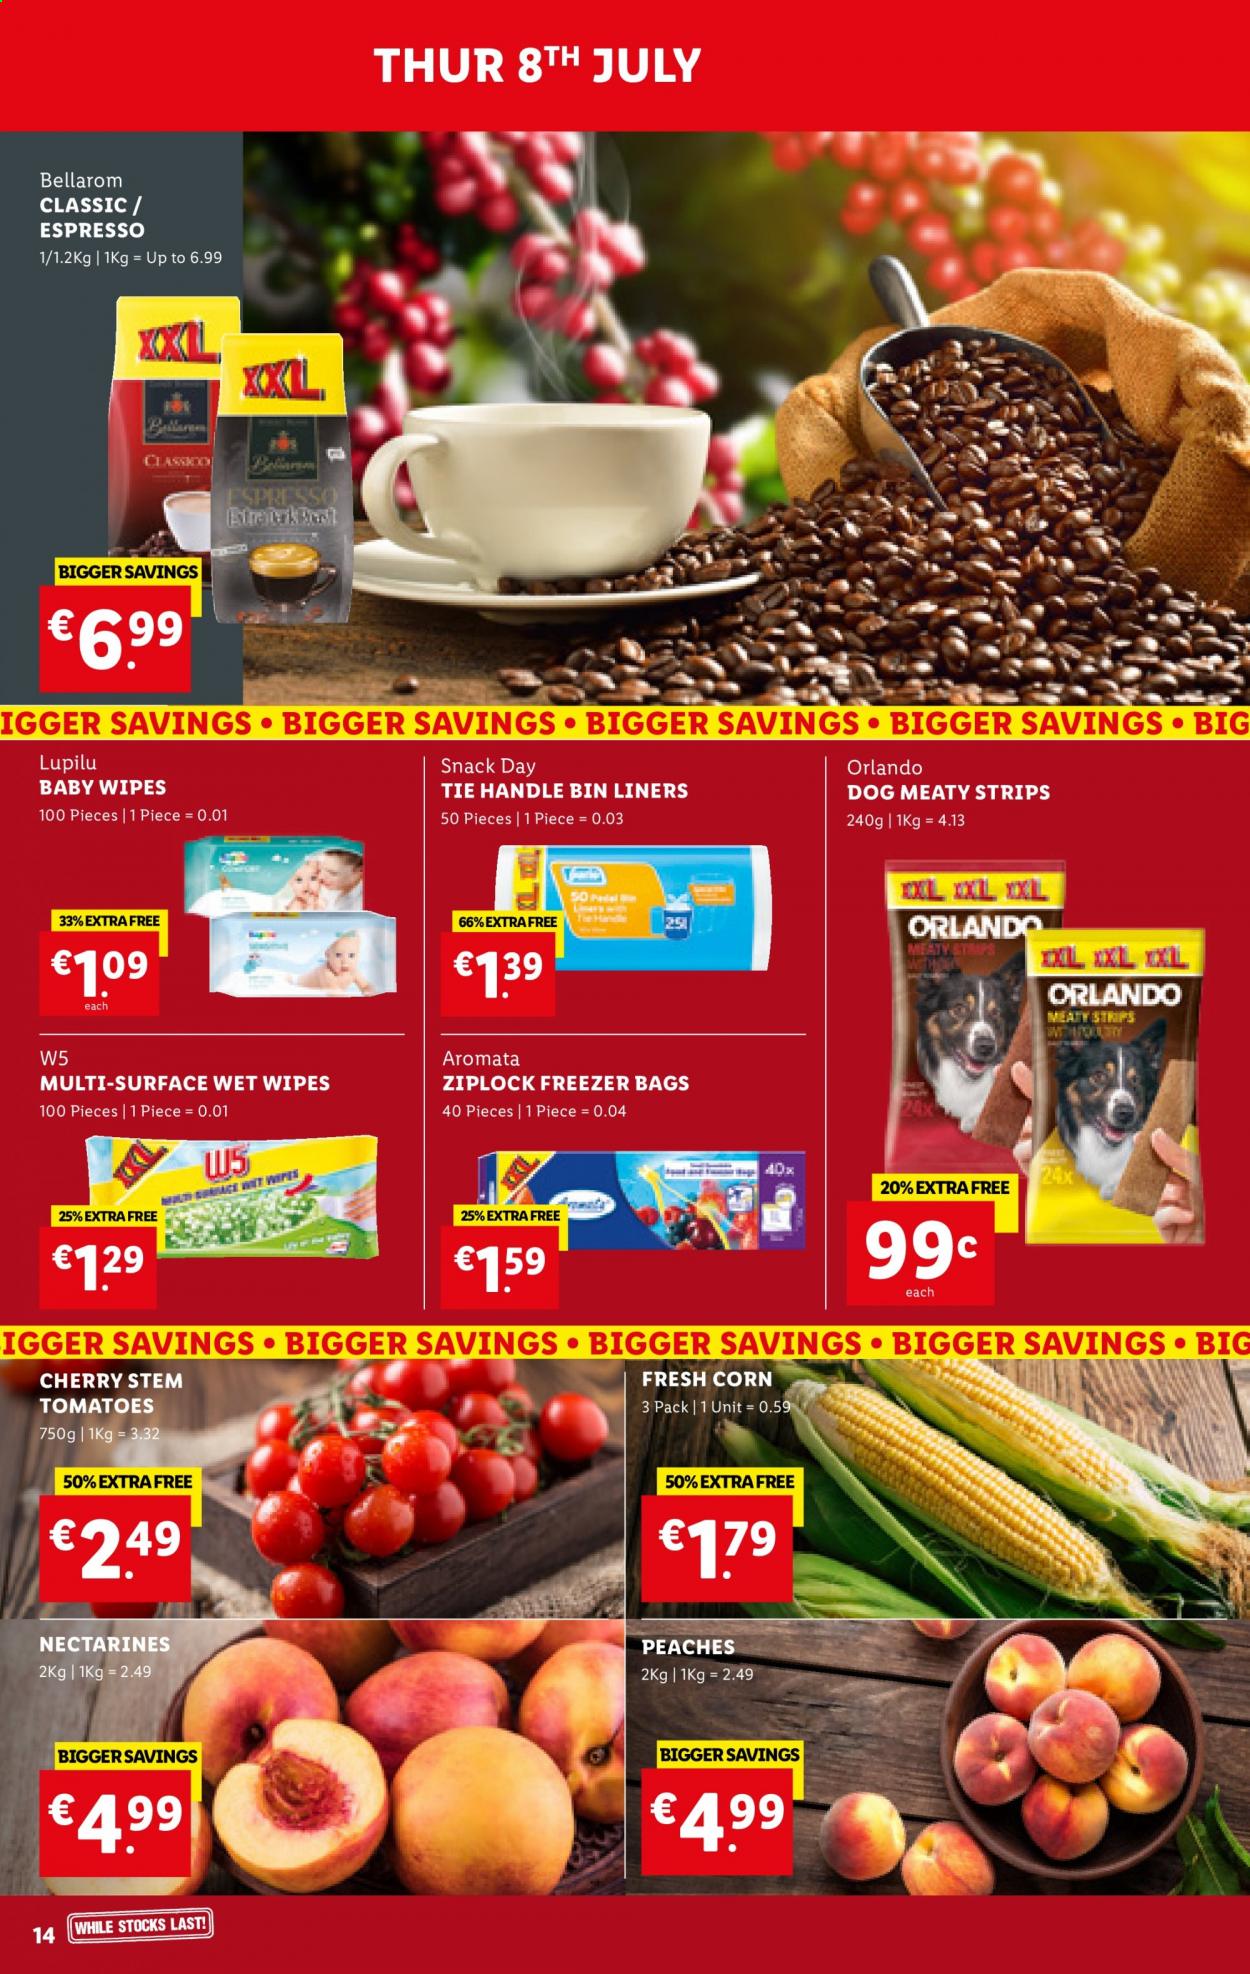 thumbnail - Lidl offer  - 08.07.2021 - 14.07.2021 - Sales products - Lupilu, corn, tomatoes, nectarines, cherries, peaches, strips, snack, wipes, baby wipes, bin, freezer bag, bag. Page 14.